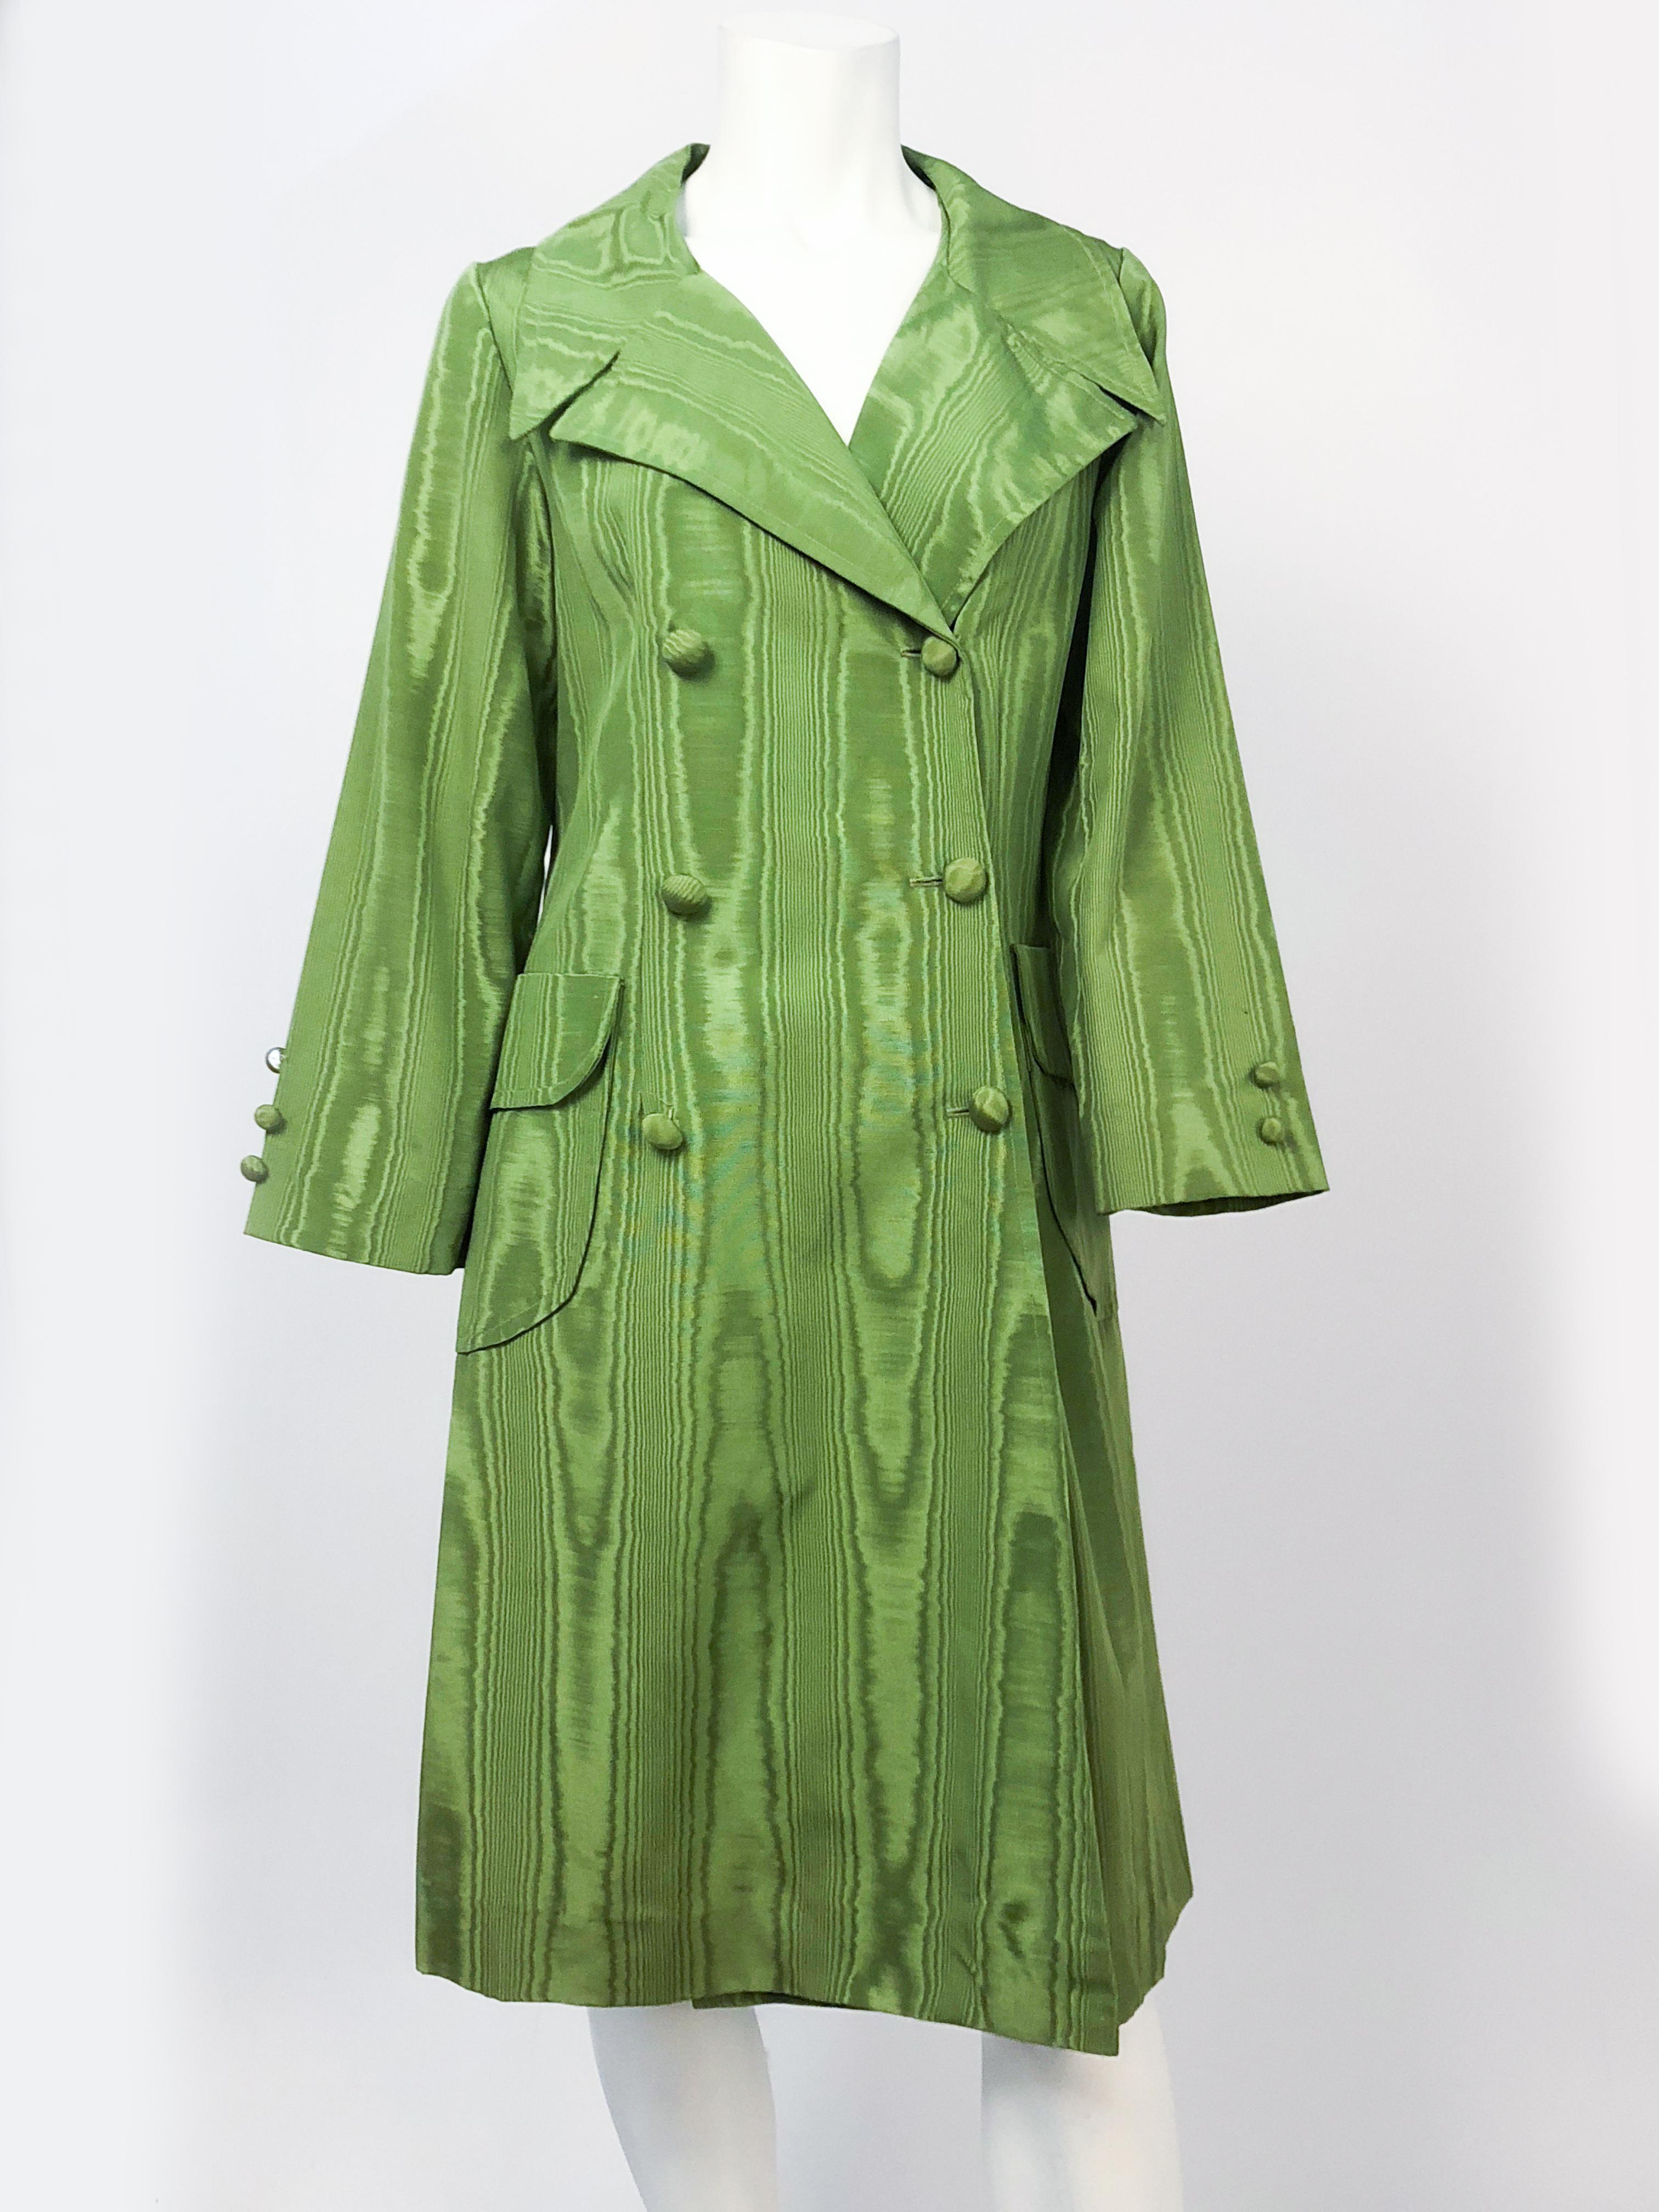 1970s Avocado Green Moire Coat featuring covered buttons, 2 front oversized pockets, tapered A-line to the knee.